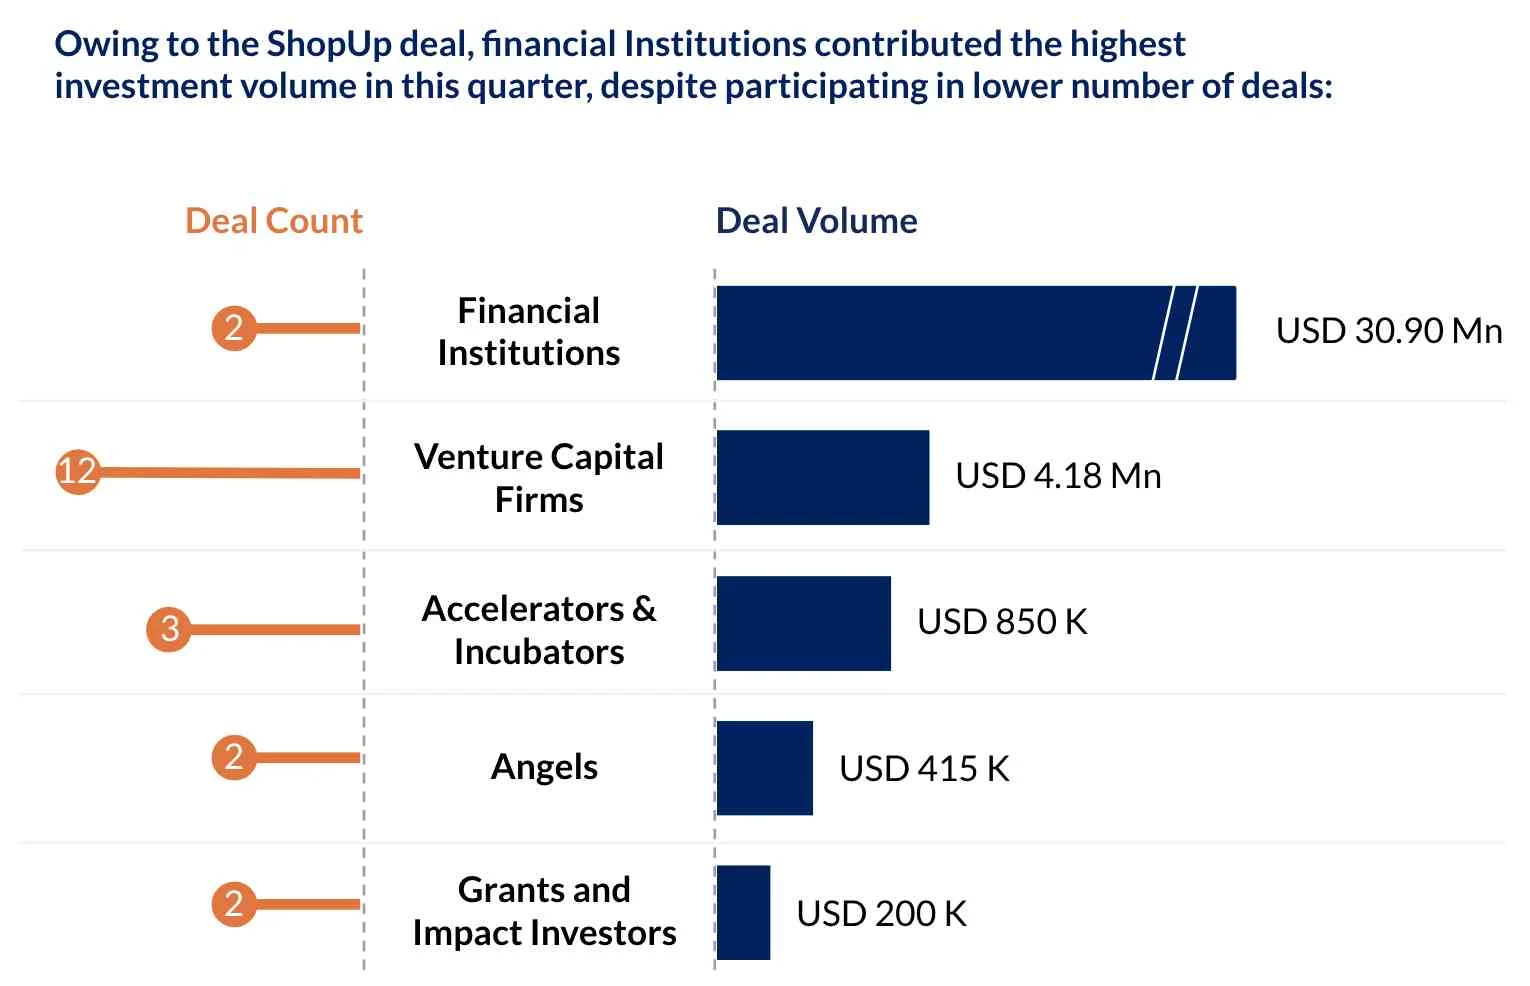 The number of investments and the investment volume sourced from different categories of investors